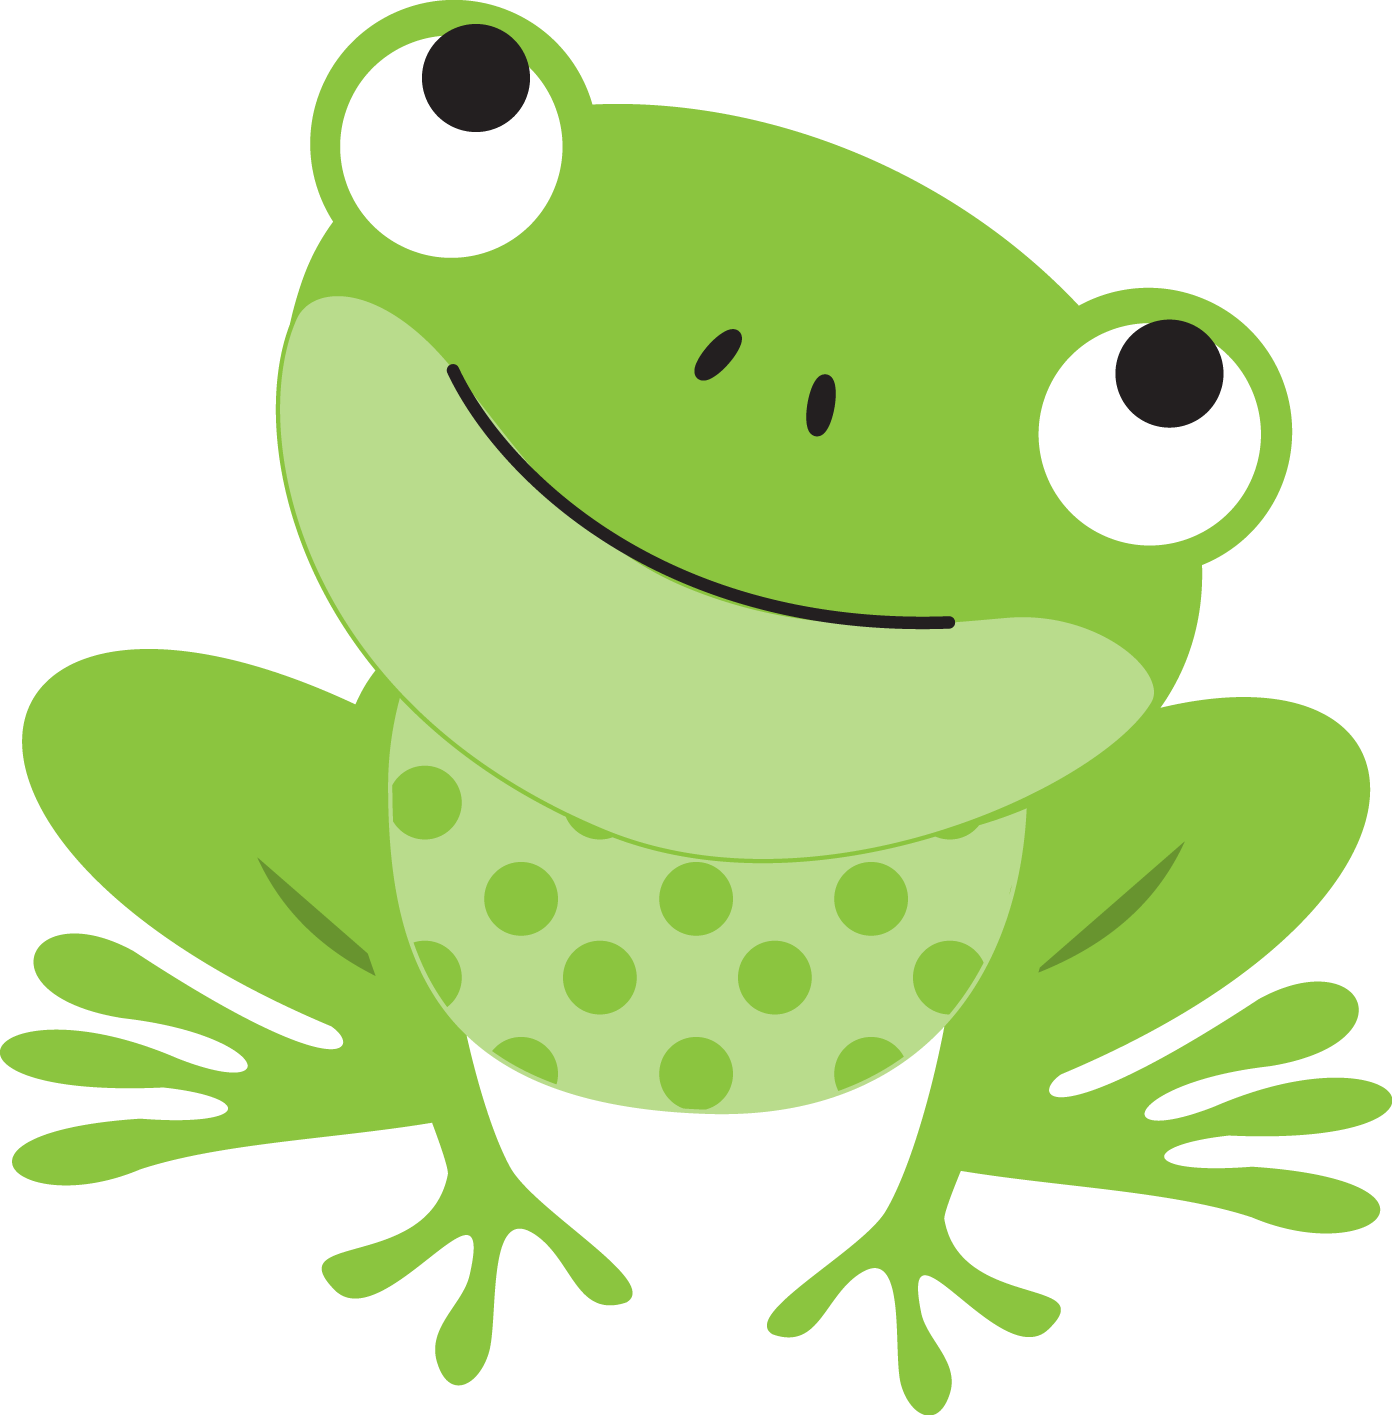 The Tree Frog Clip Art Clipart Png Download 13921415 Free.